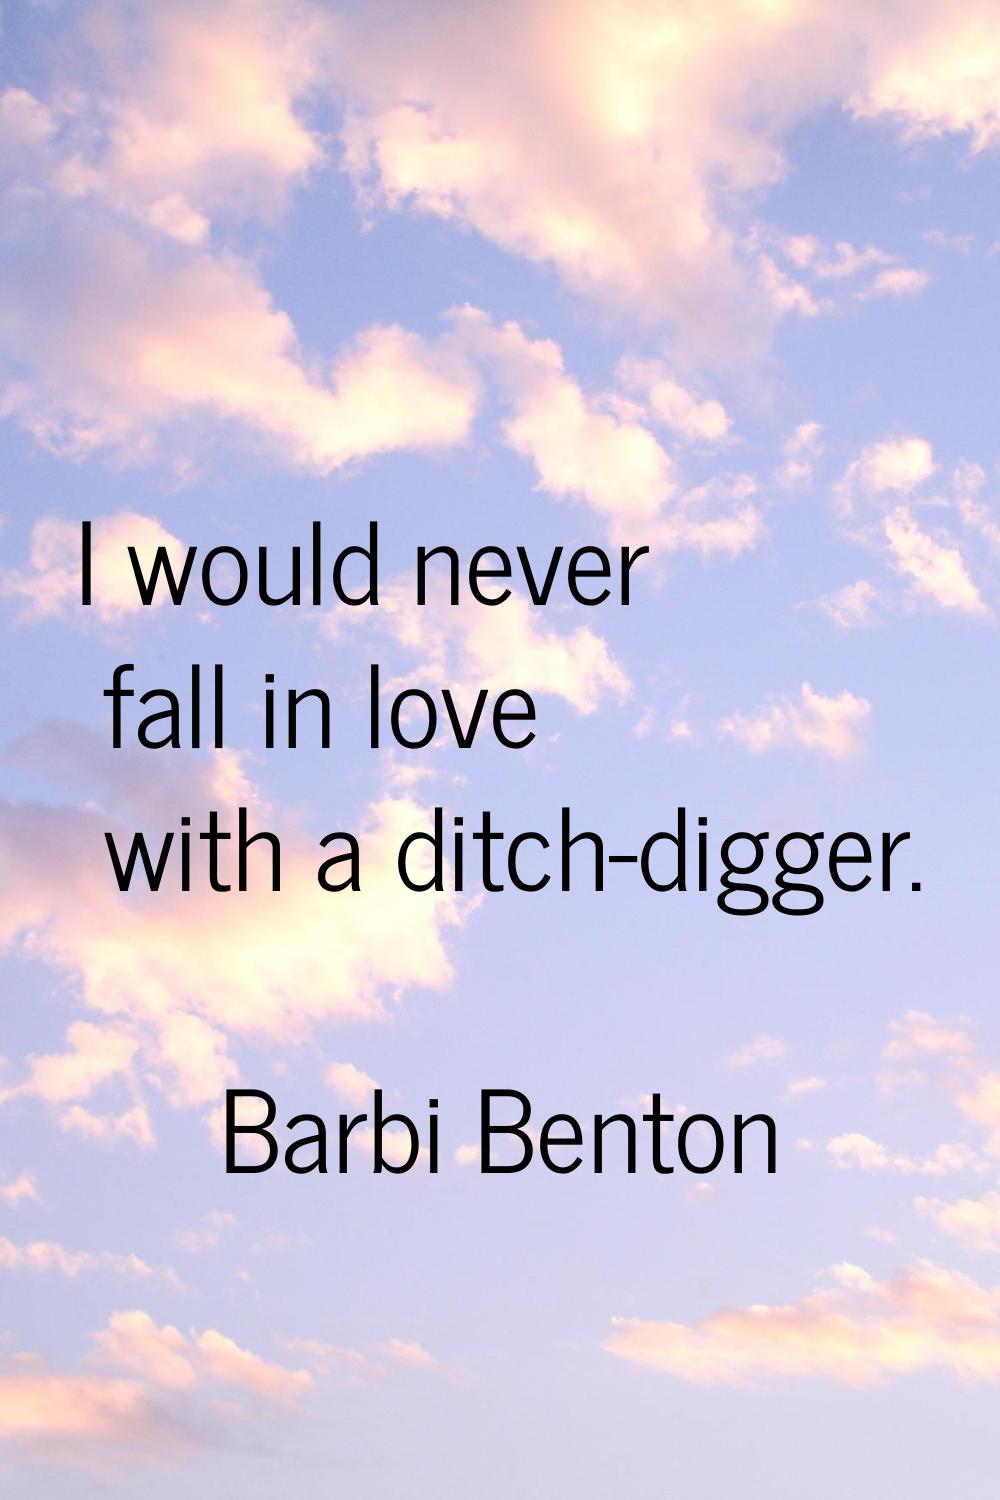 I would never fall in love with a ditch-digger.